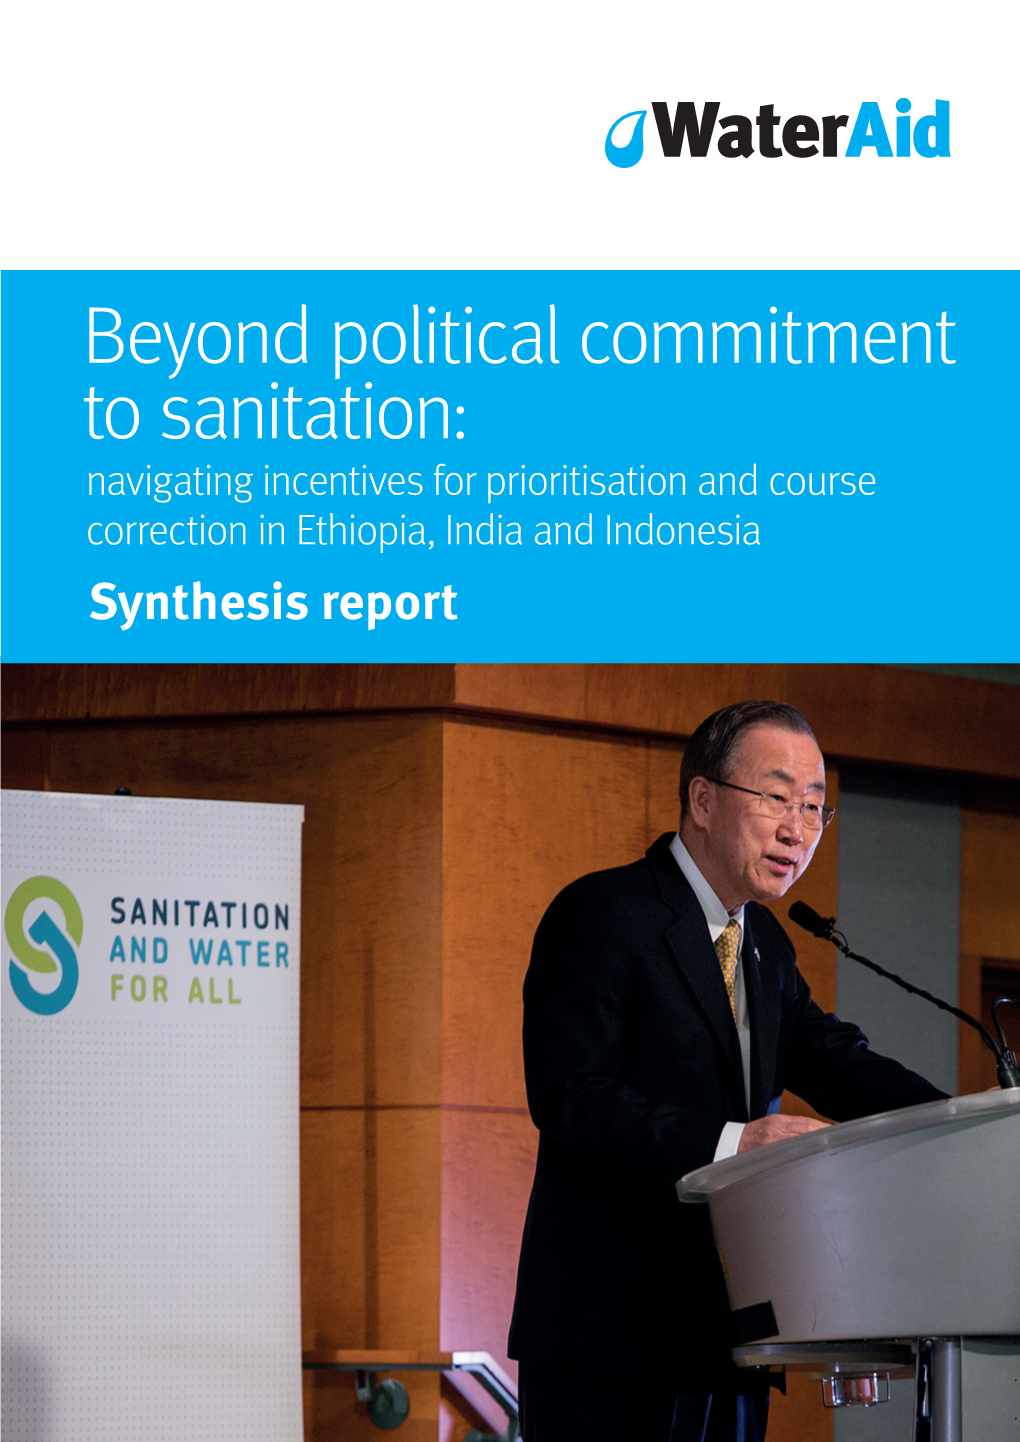 Beyond Political Commitment to Sanitation: Synthesis Report